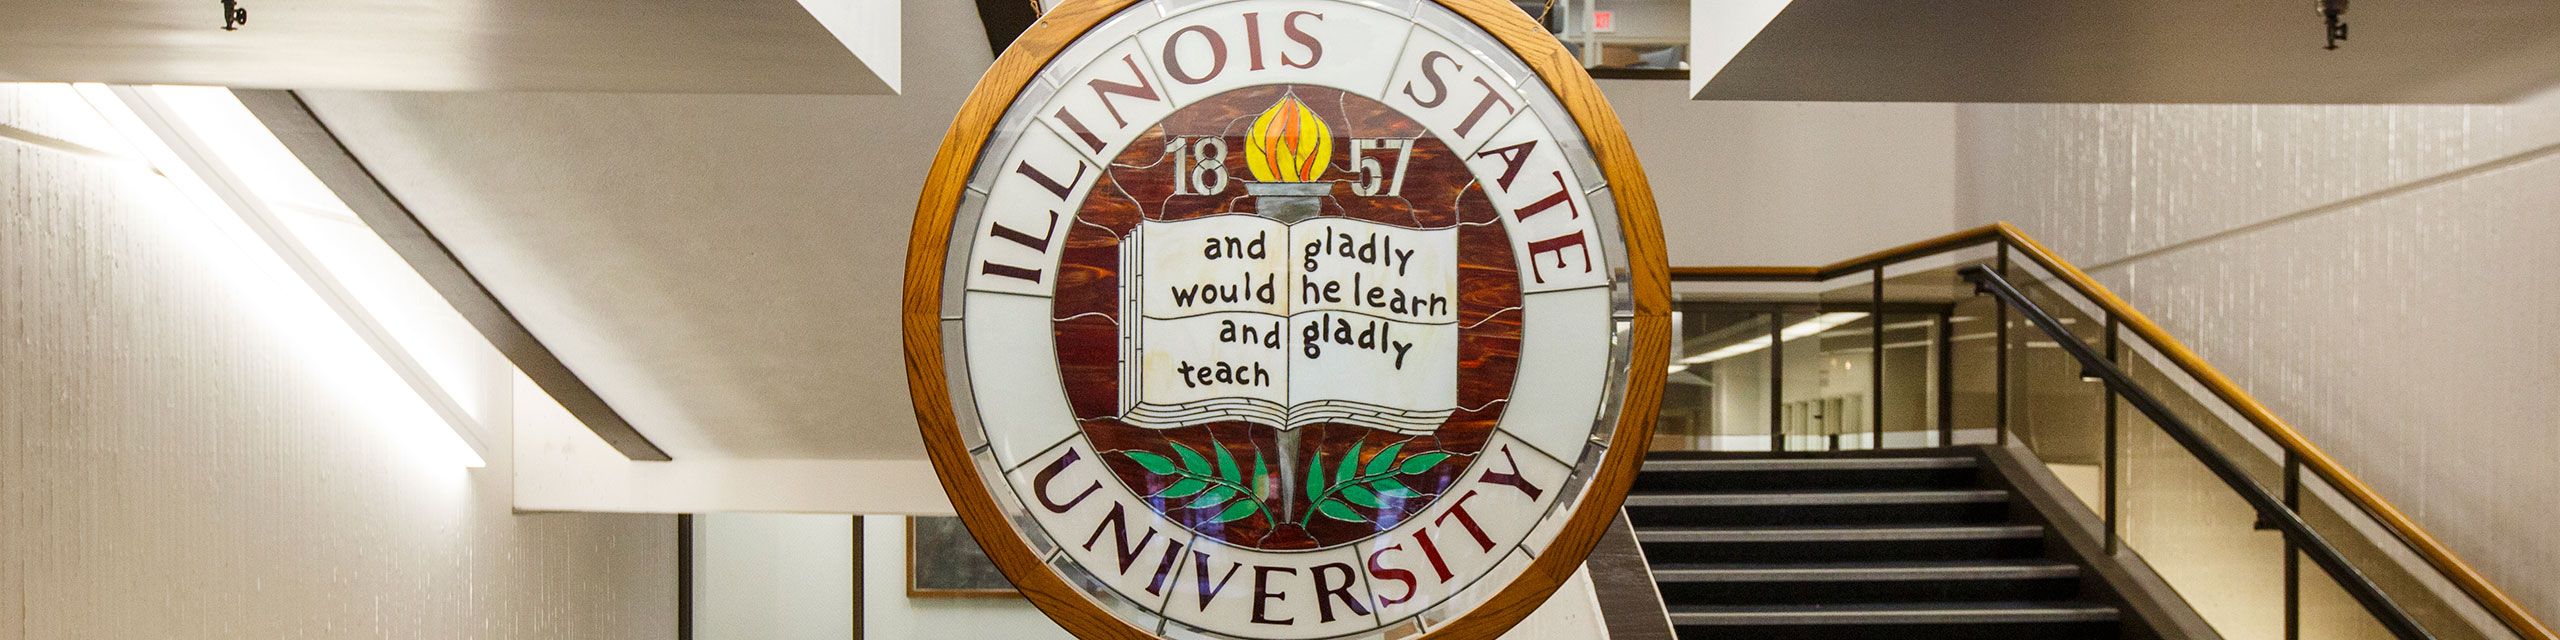 ISU seal with words: and gladly would he learn and gladly teach.